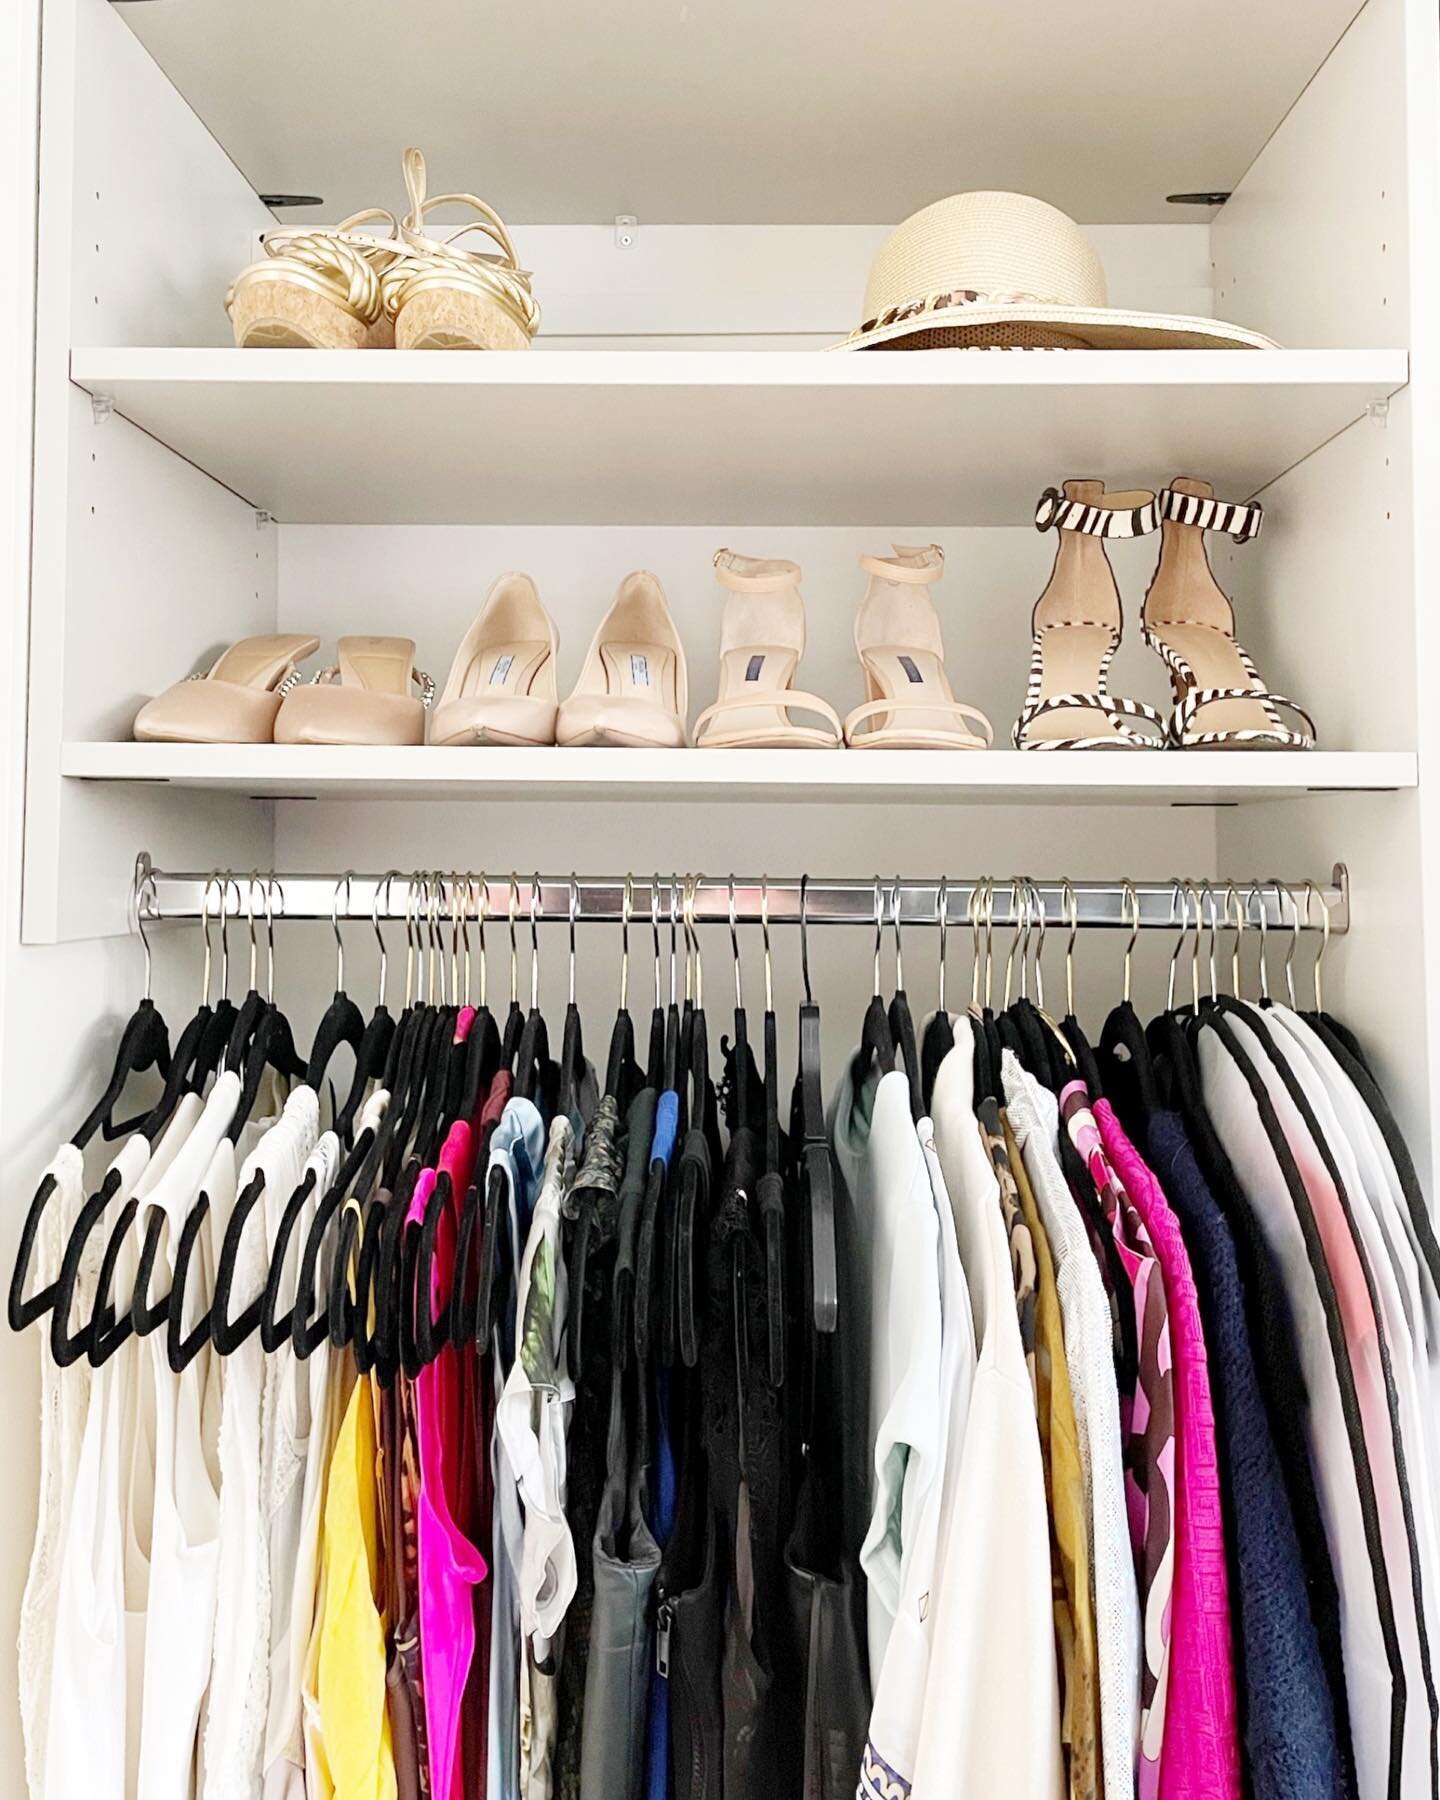 Good morning 😀

Closet organizing tip: 

If you are doing some closet decluttering this spring, maybe also consider decluttering those plastic hangers and switching out to something more sleek like velour hangers. They actually take up less space an